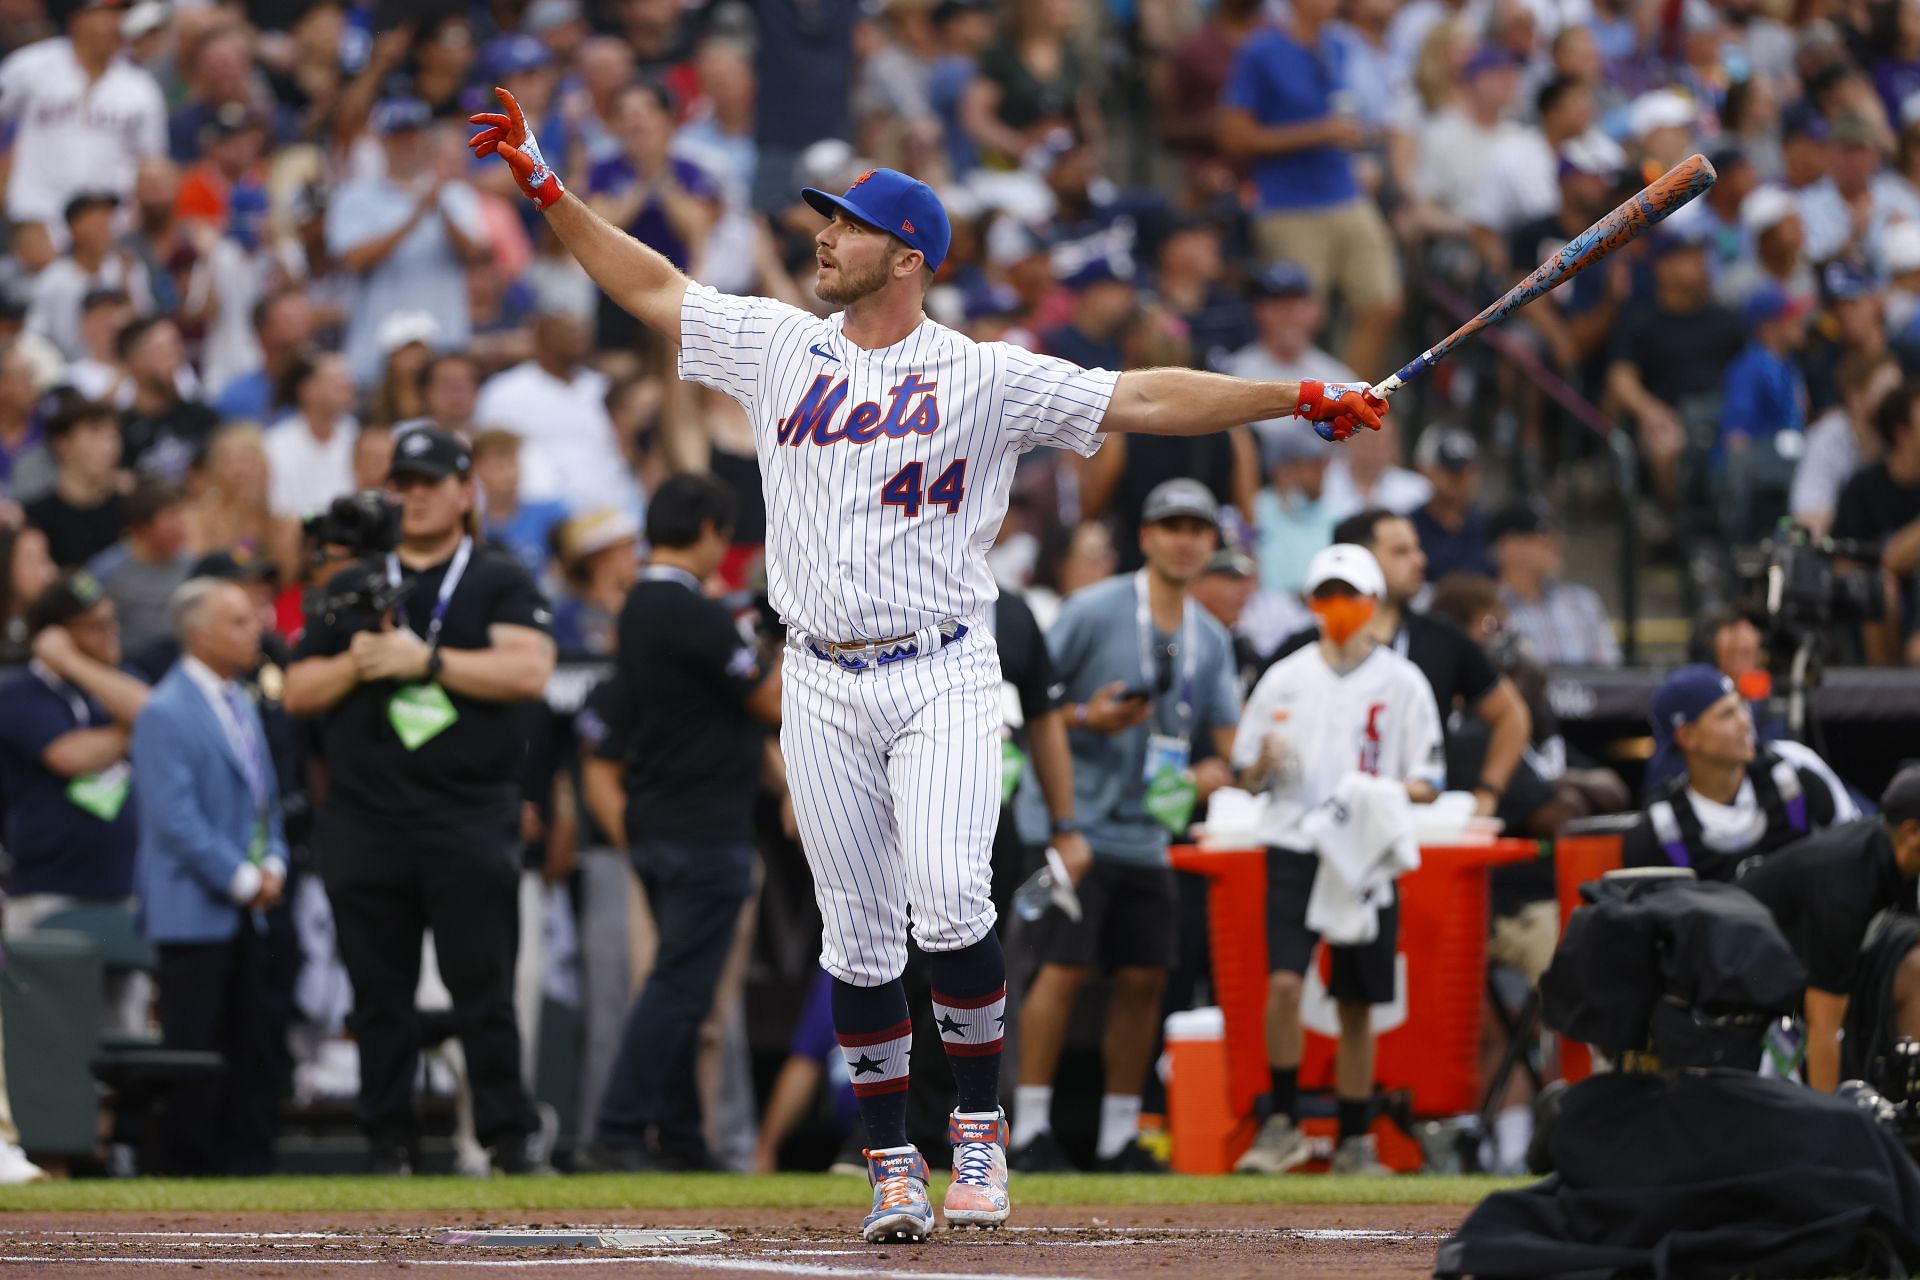 Pete Alonso winning the 2021 Home Run Derby